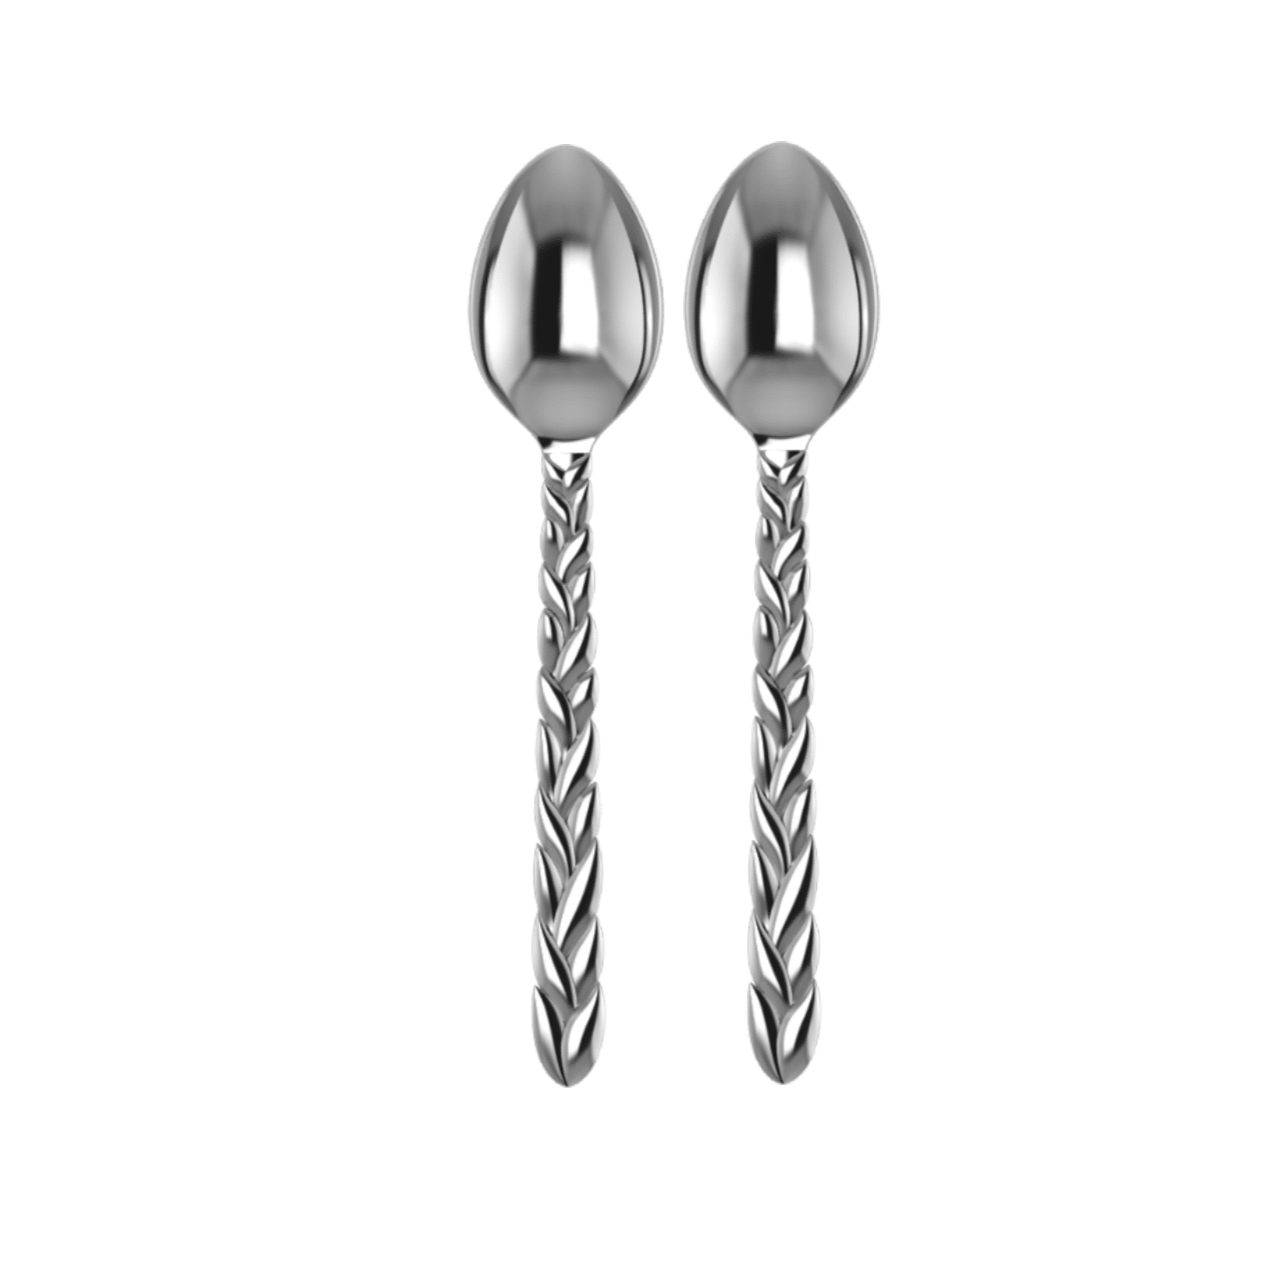 Sterling Silver Tea Spoon Set - The Interlace Collection